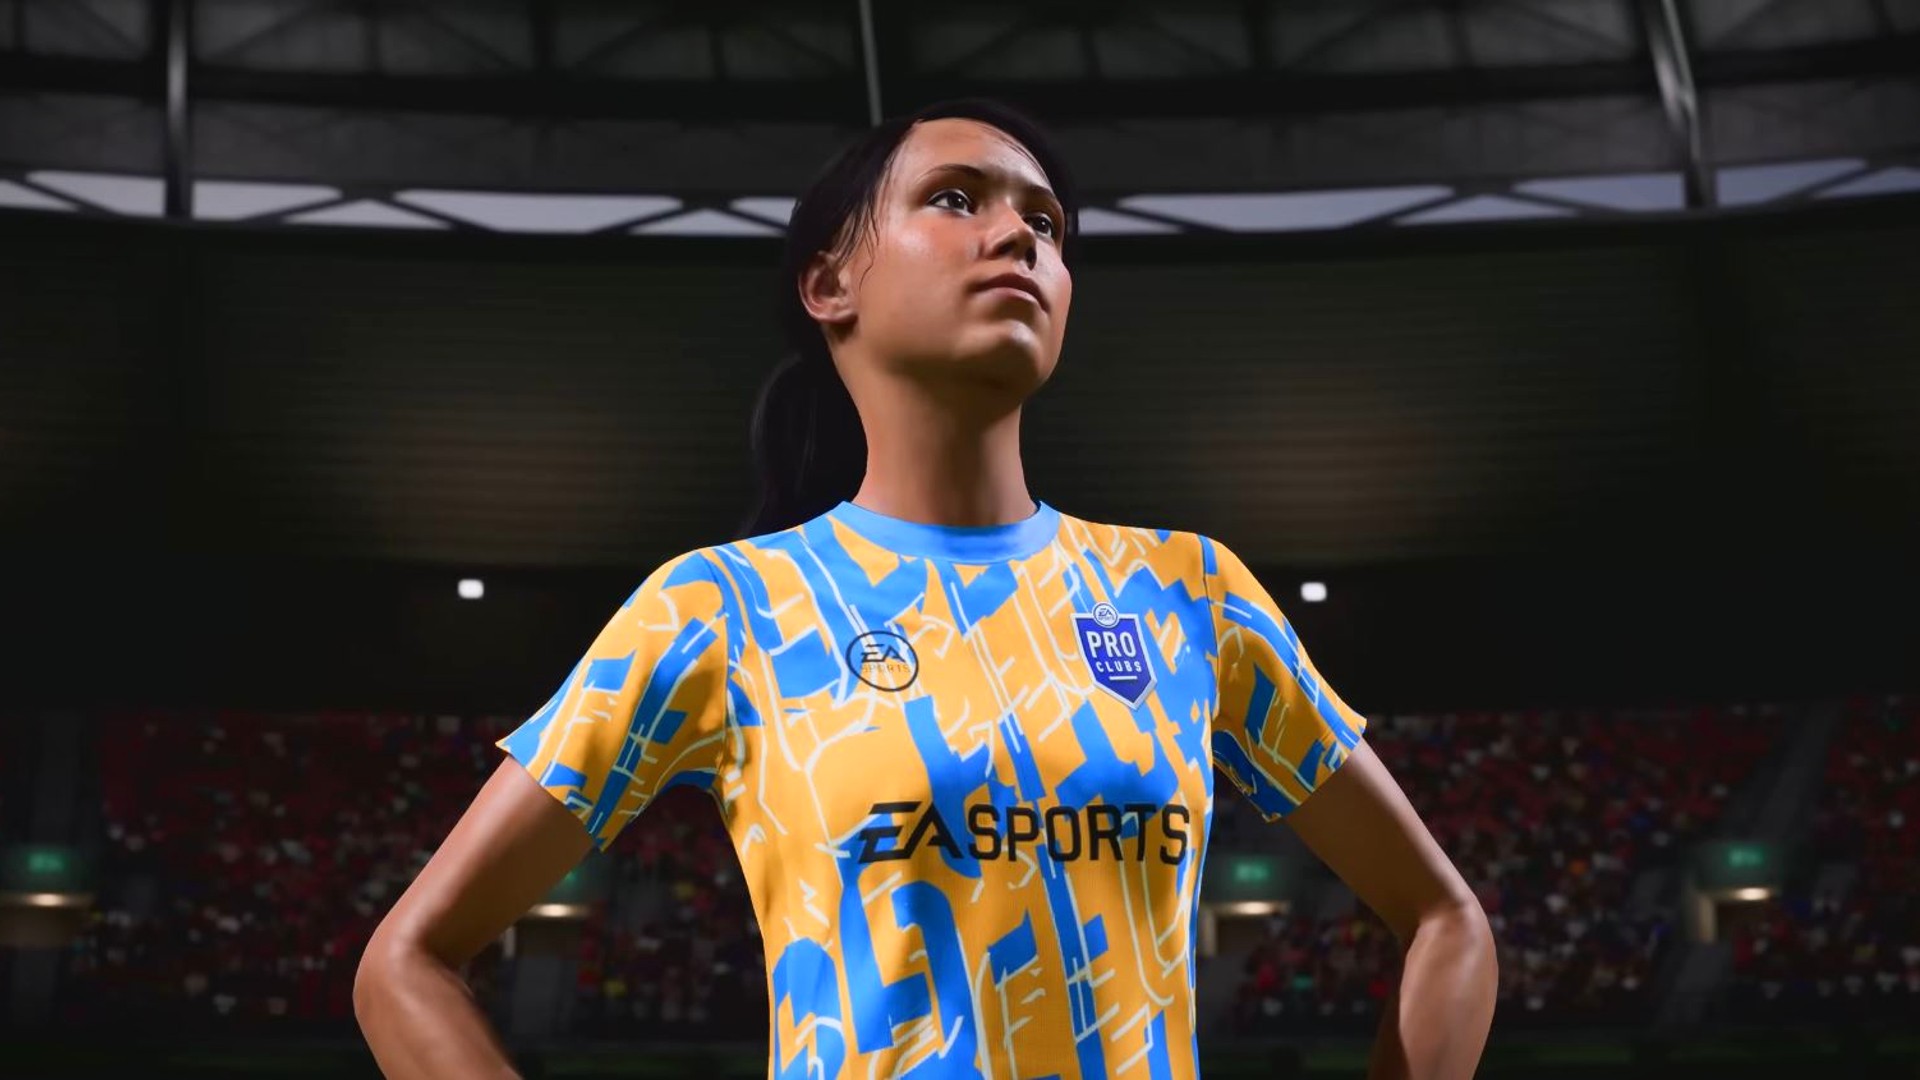 FIFA 23: EA responds to FIFA 23 Pro Clubs cross-play controversy after  community backlash : r/FIFANEWS